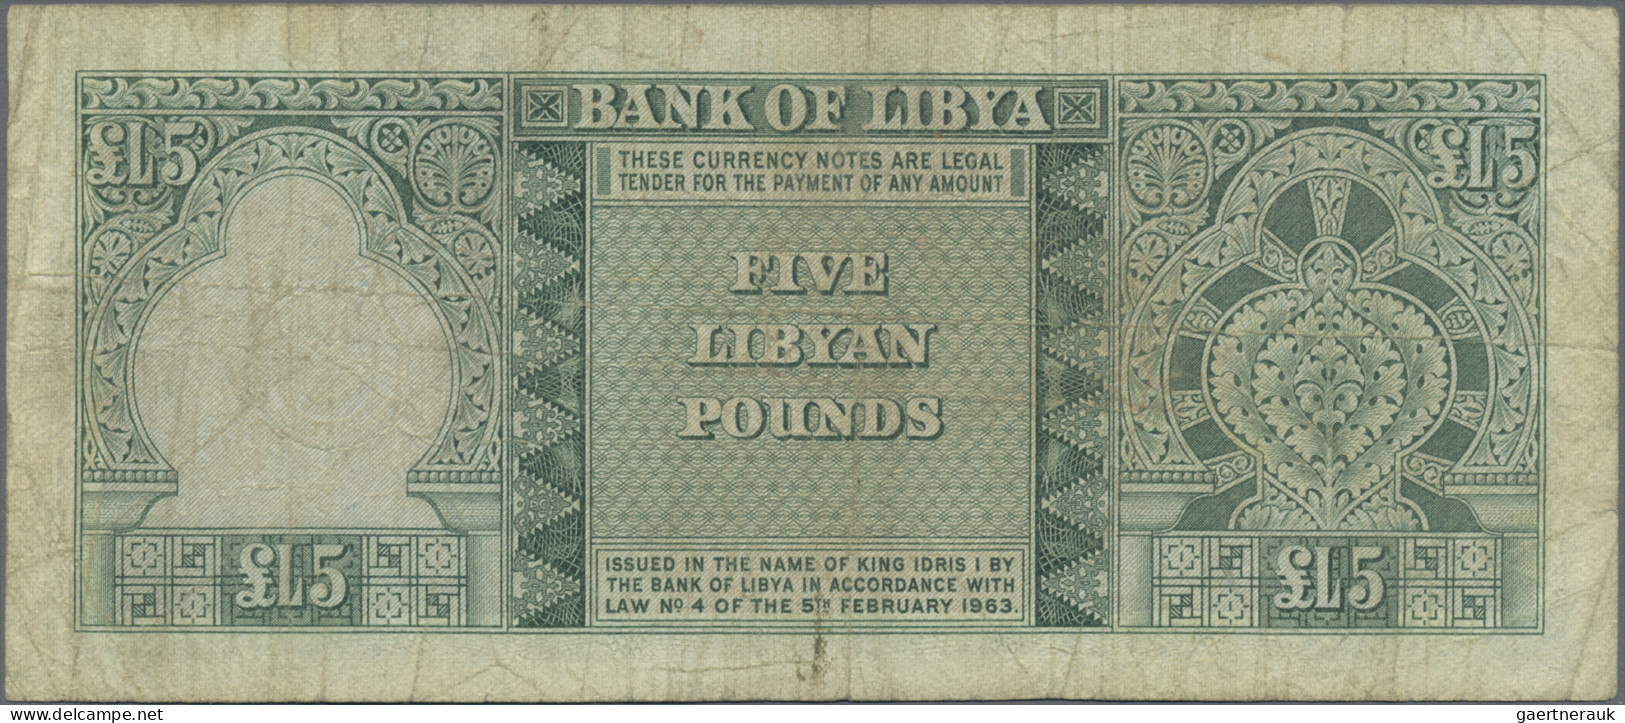 Libya: Bank of Libya, very nice set with 4 banknotes, 1959-1963 series, with ¼ a